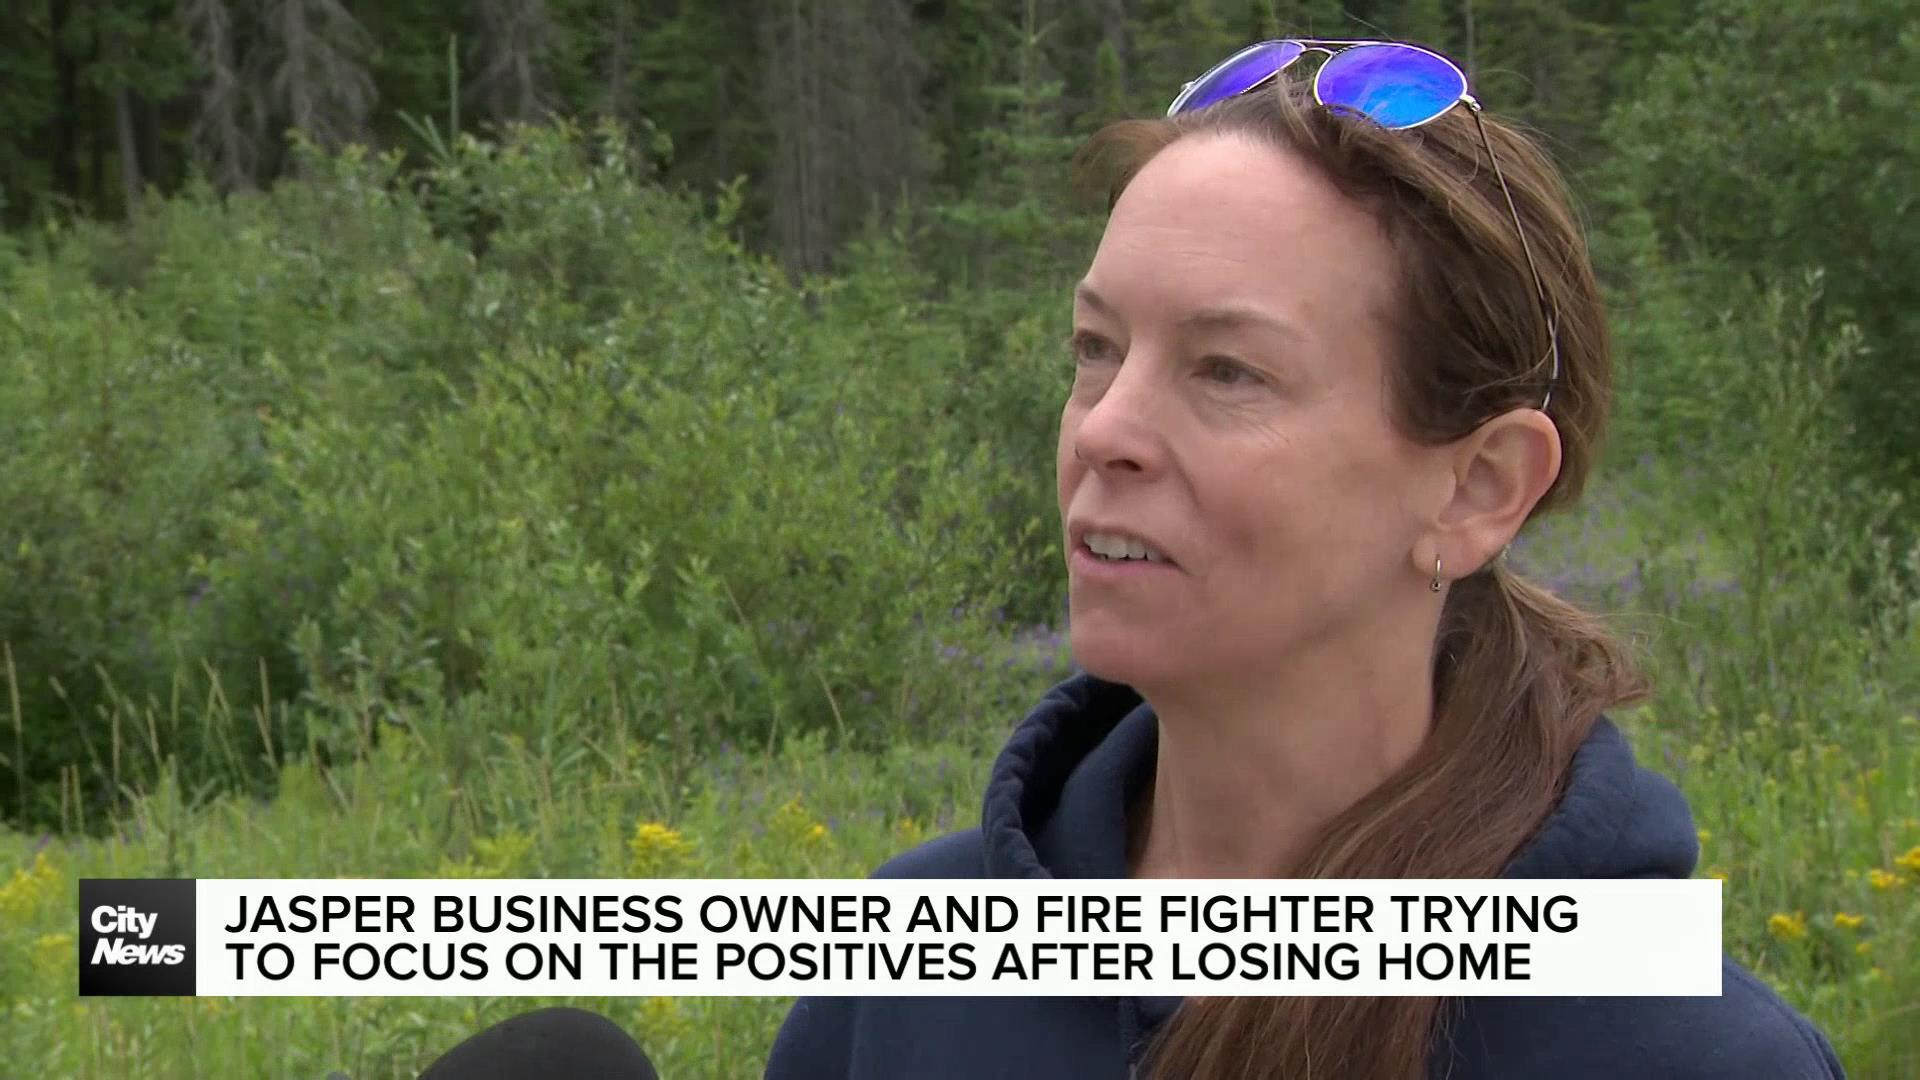 Jasper business owner and firefighter focusing on the positives after losing her home.